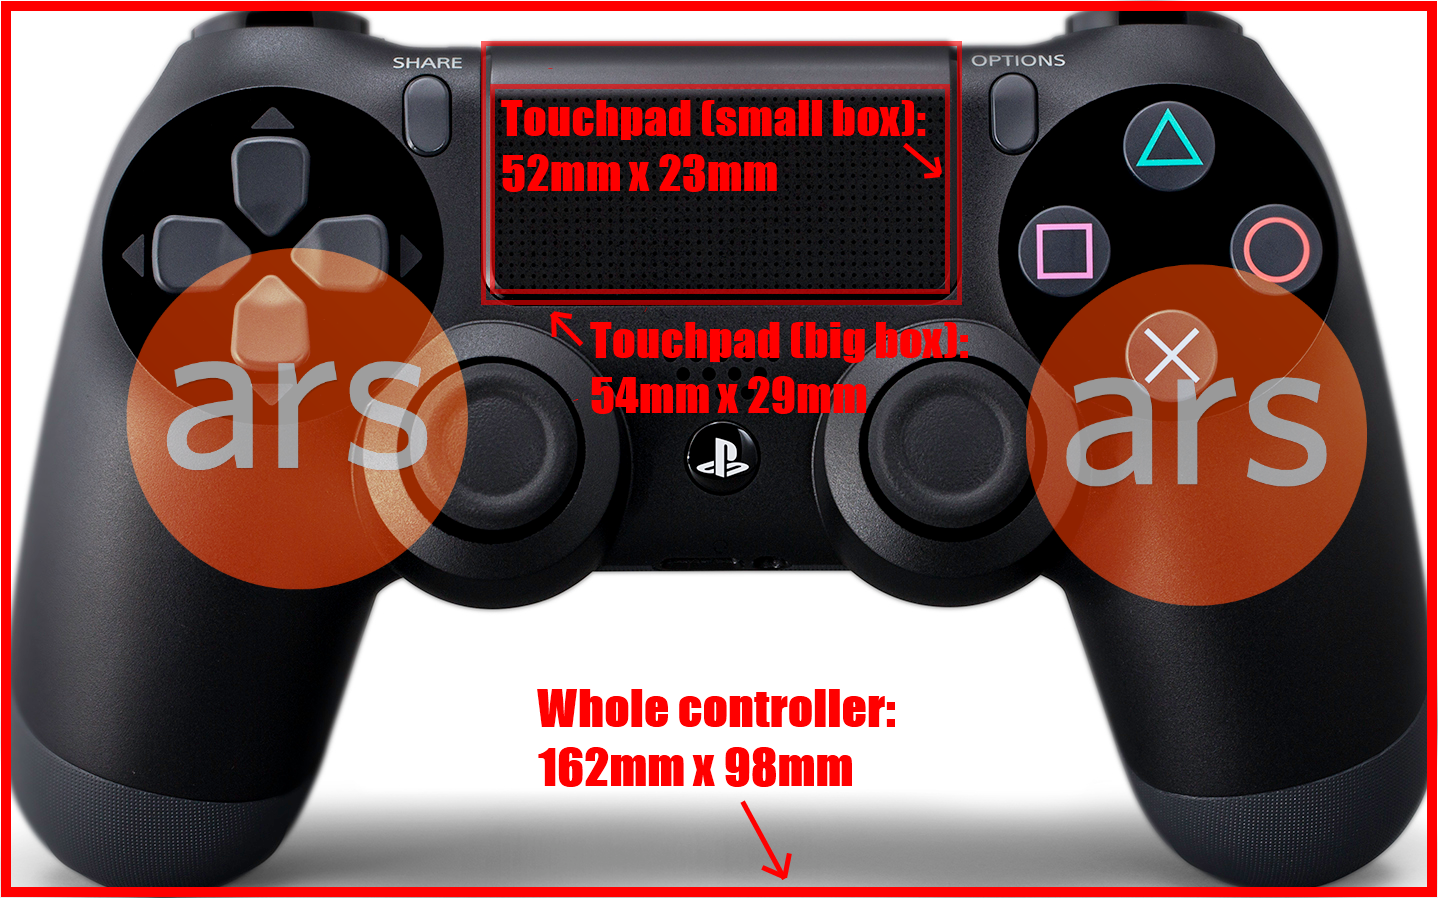 Crack pot cabriolet spejder Ars calculates the size of the DualShock 4 touchpad: about 2.1” x 1” | Ars  Technica